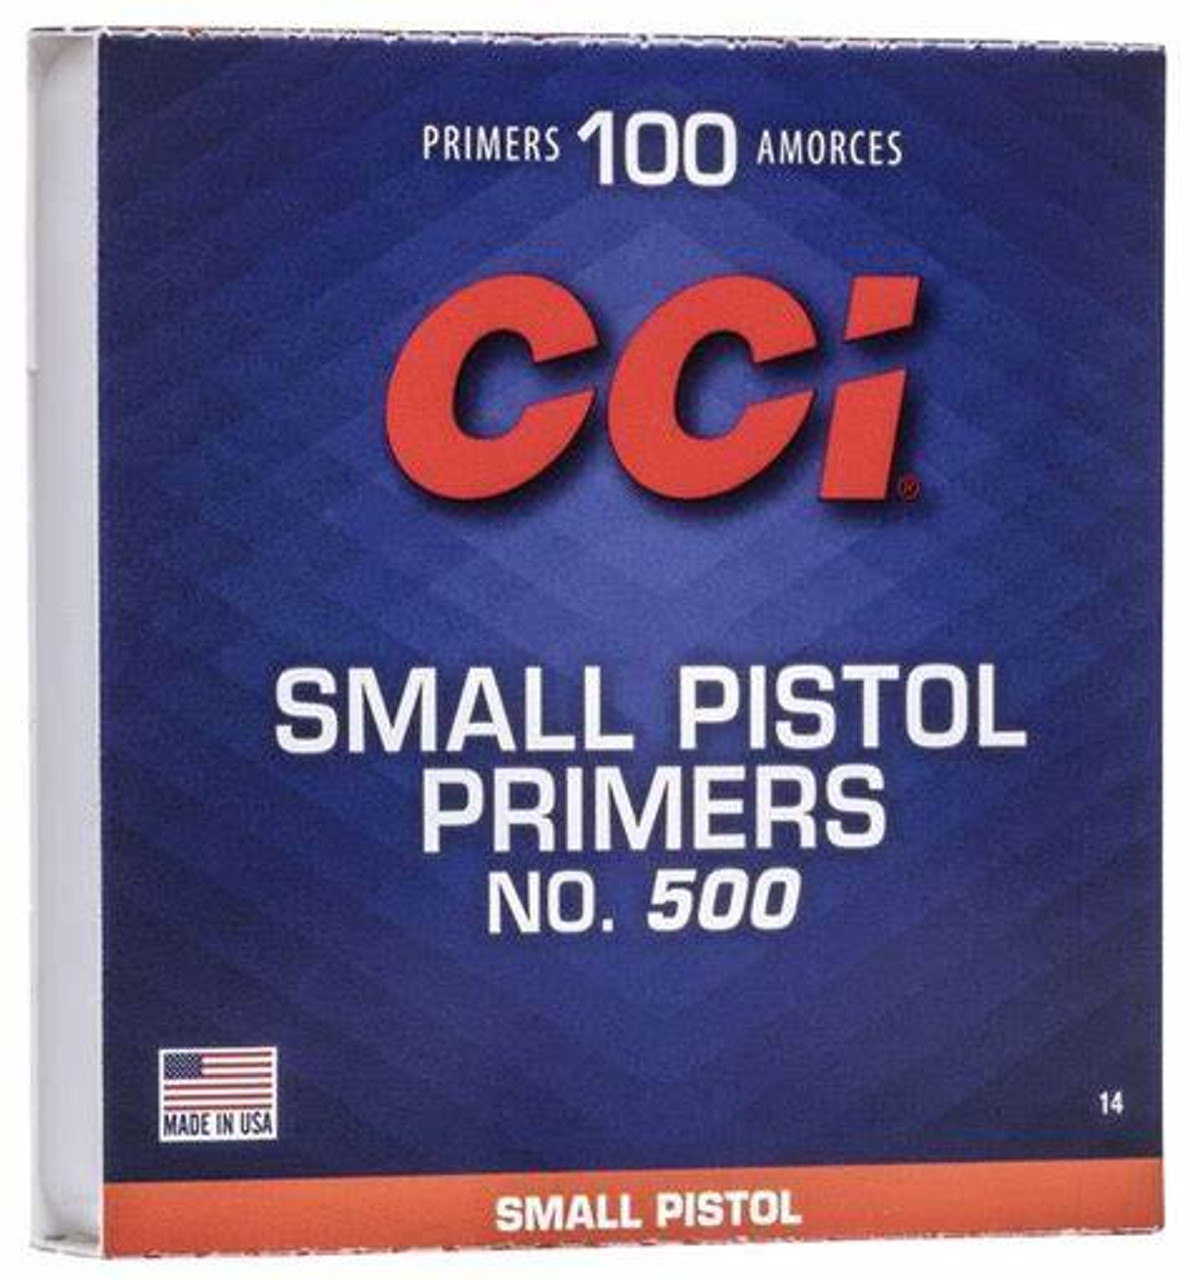 CCI #500 Small Pistol Primers - 100 Count - The CCI #500 Primers are the great choice for bench loaders due to CCI's exceptional testing and improvement programs. The CCI Small Pistol Primers are available for both single stage and progress strip type applications. CCI primers use innovative non-corrosive and non-mercuric chemical formula keep you safe while in contact with the primers. 